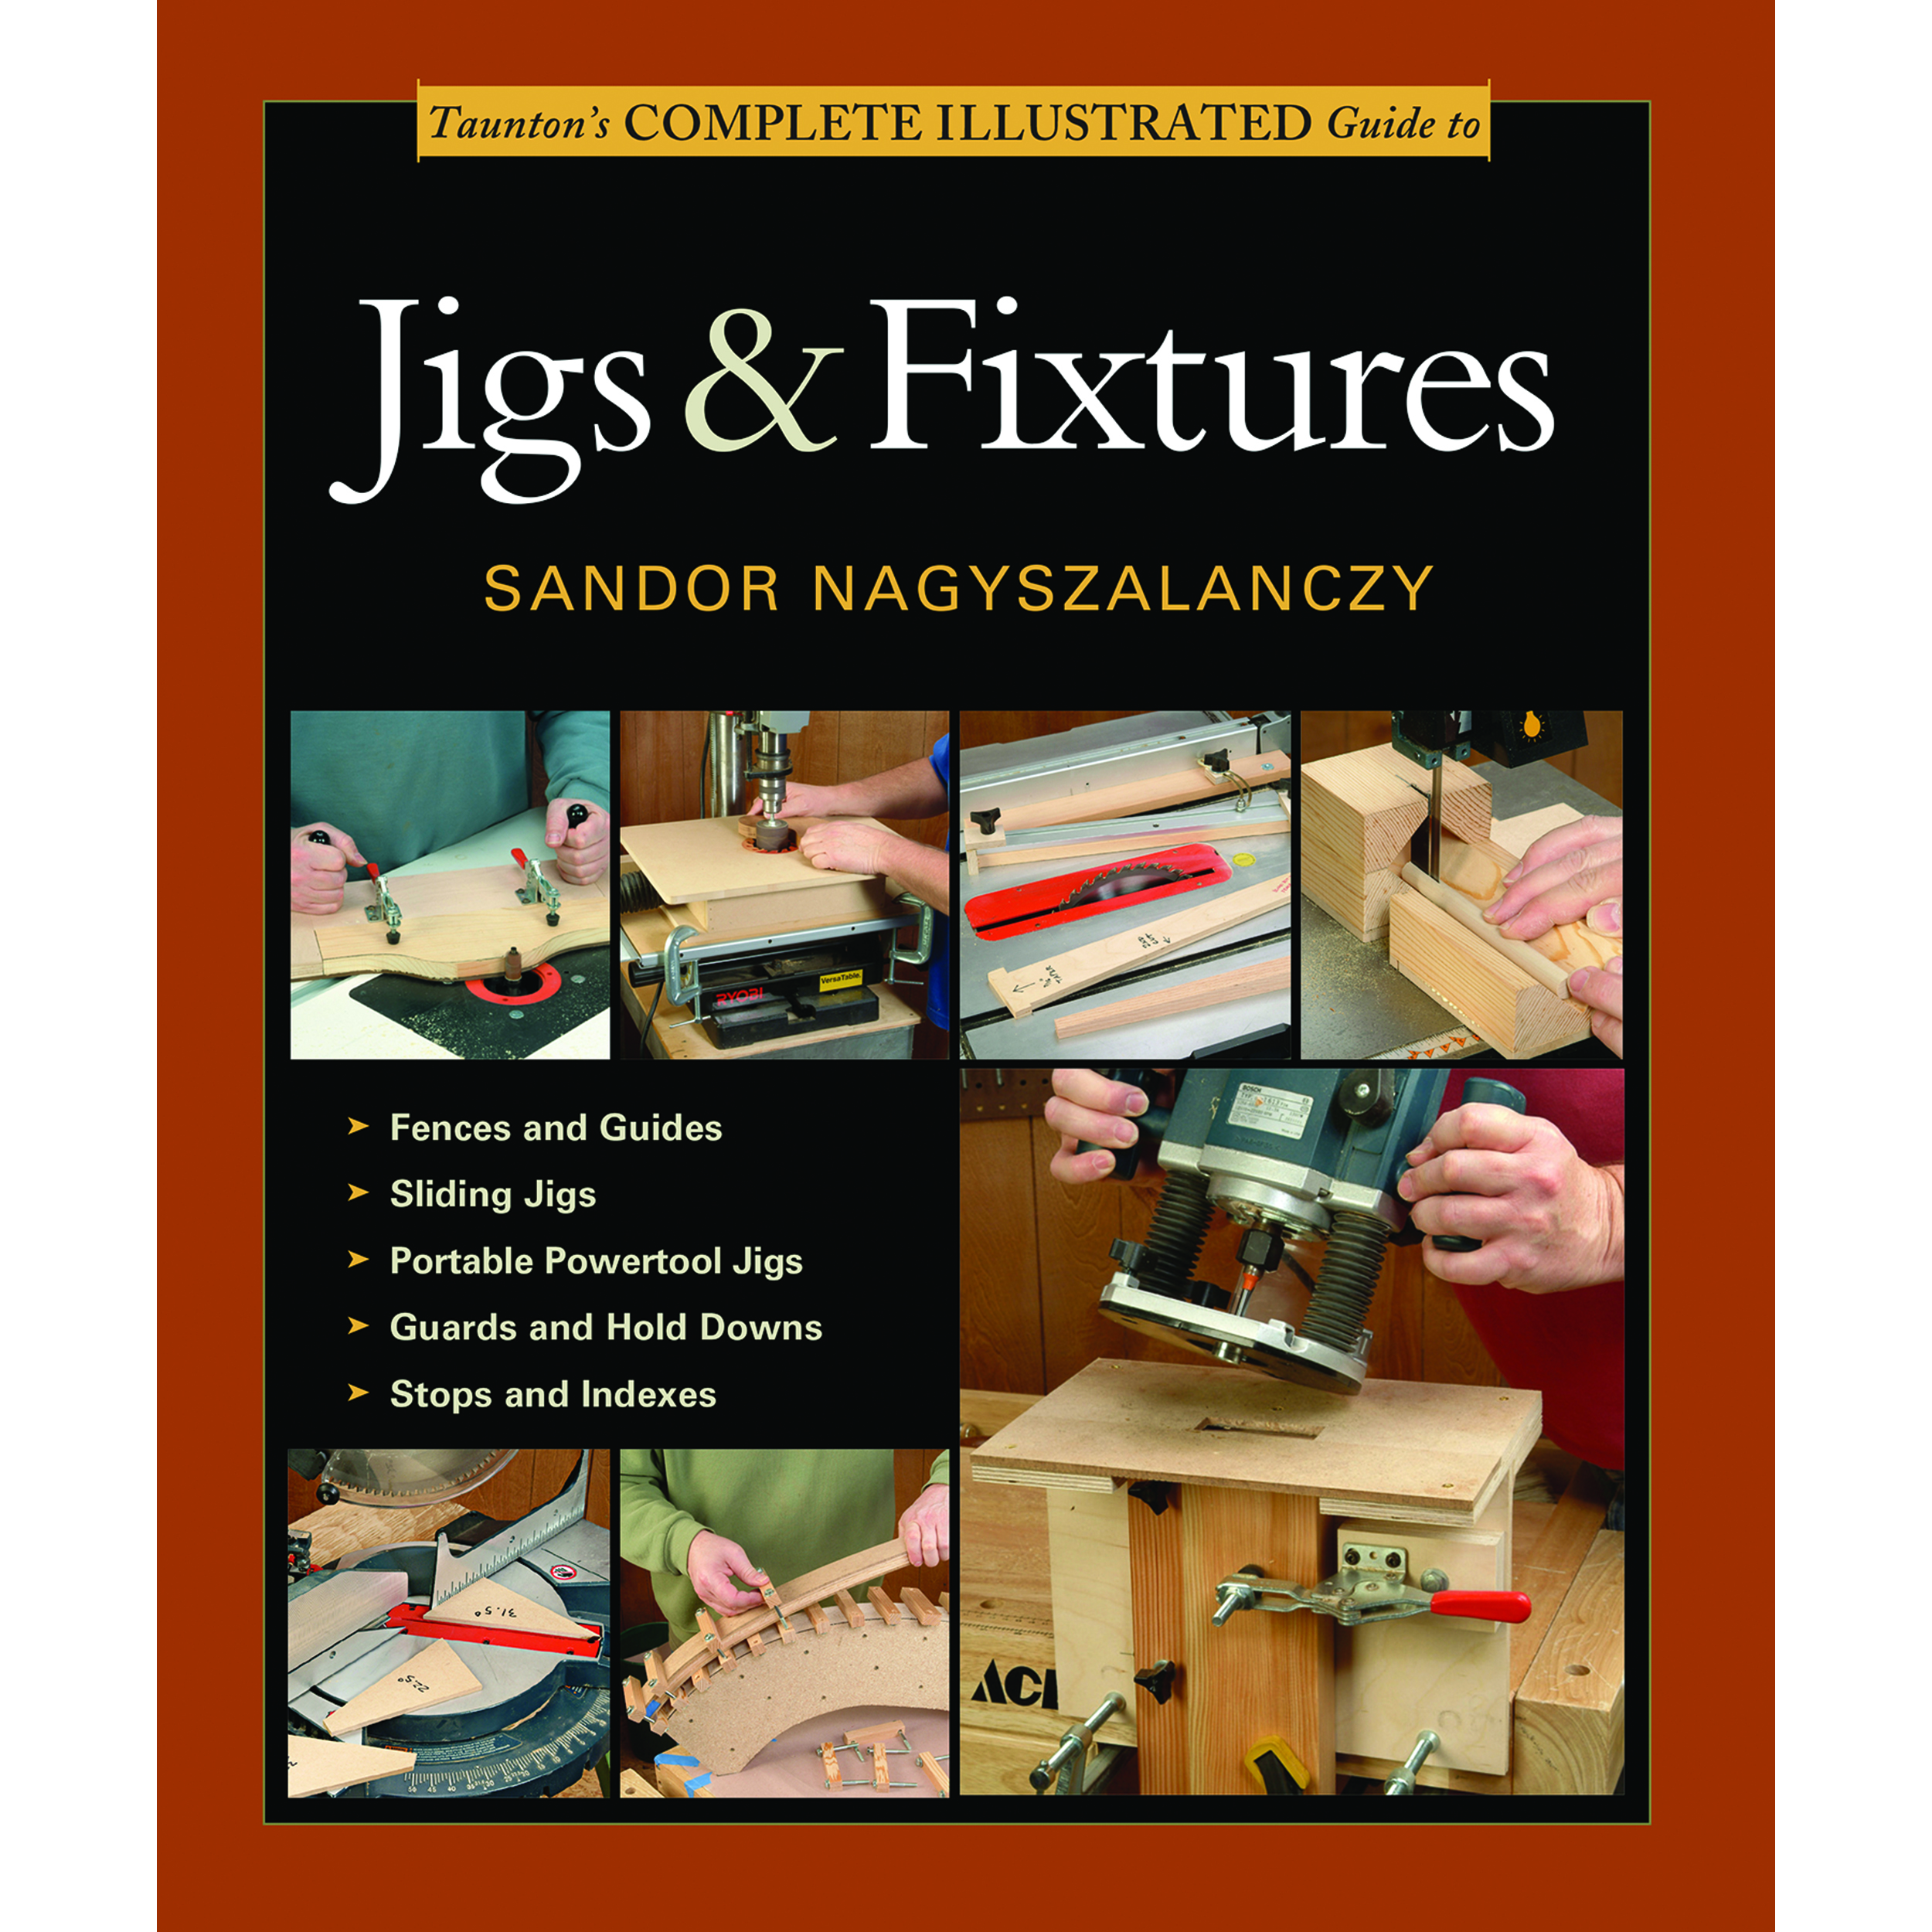 Complete Illustrated Guide To Jigs & Fixtures